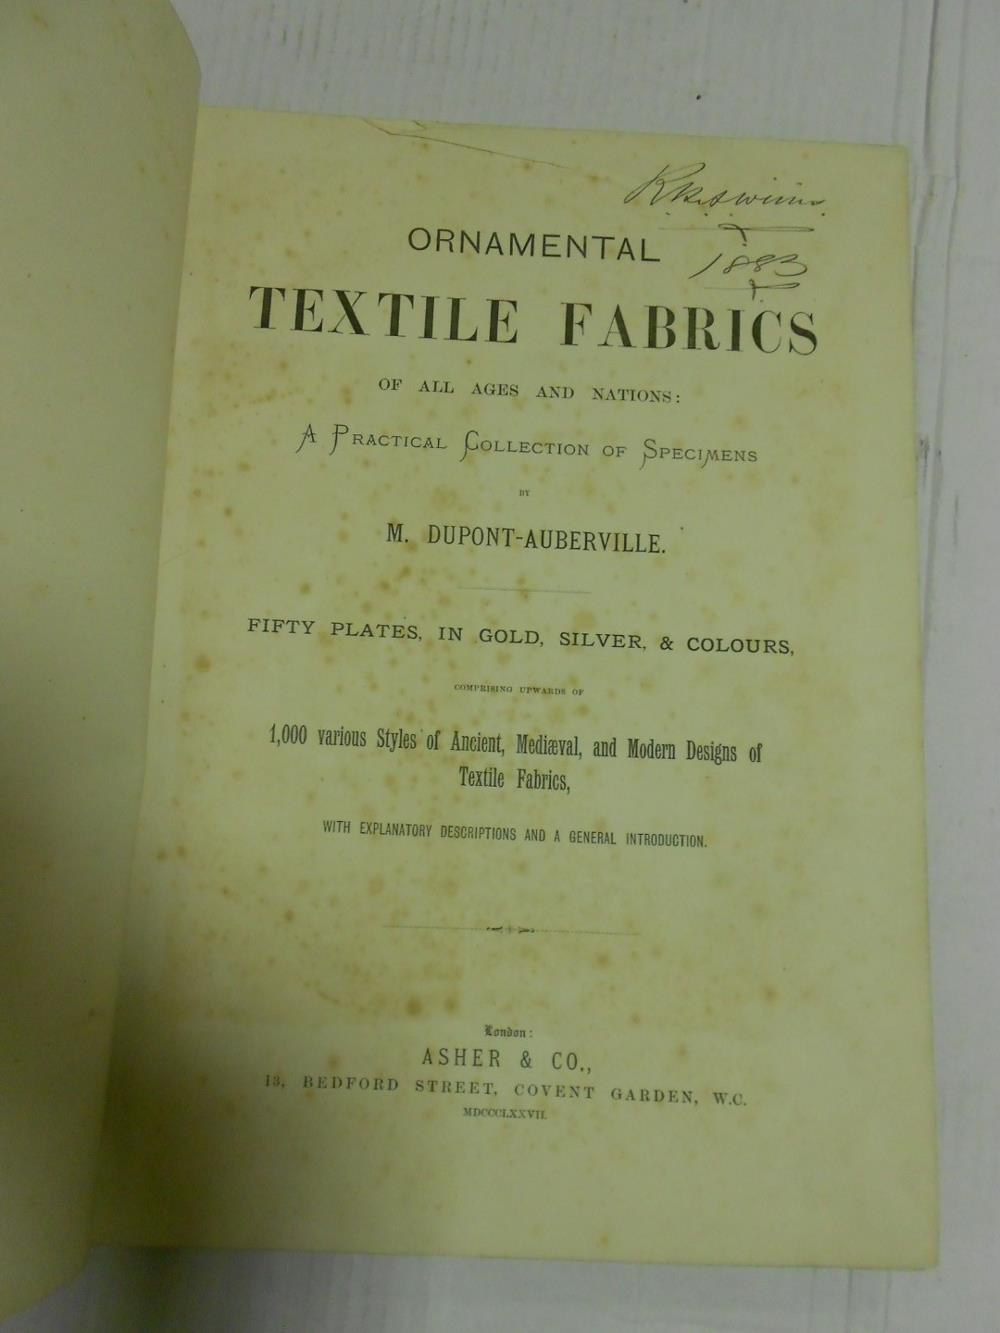 Textiles. DUPONT-AUBERVILLE (M) Ornamental Textile Fabrics of all Ages and Nations: A Practical - Image 2 of 5